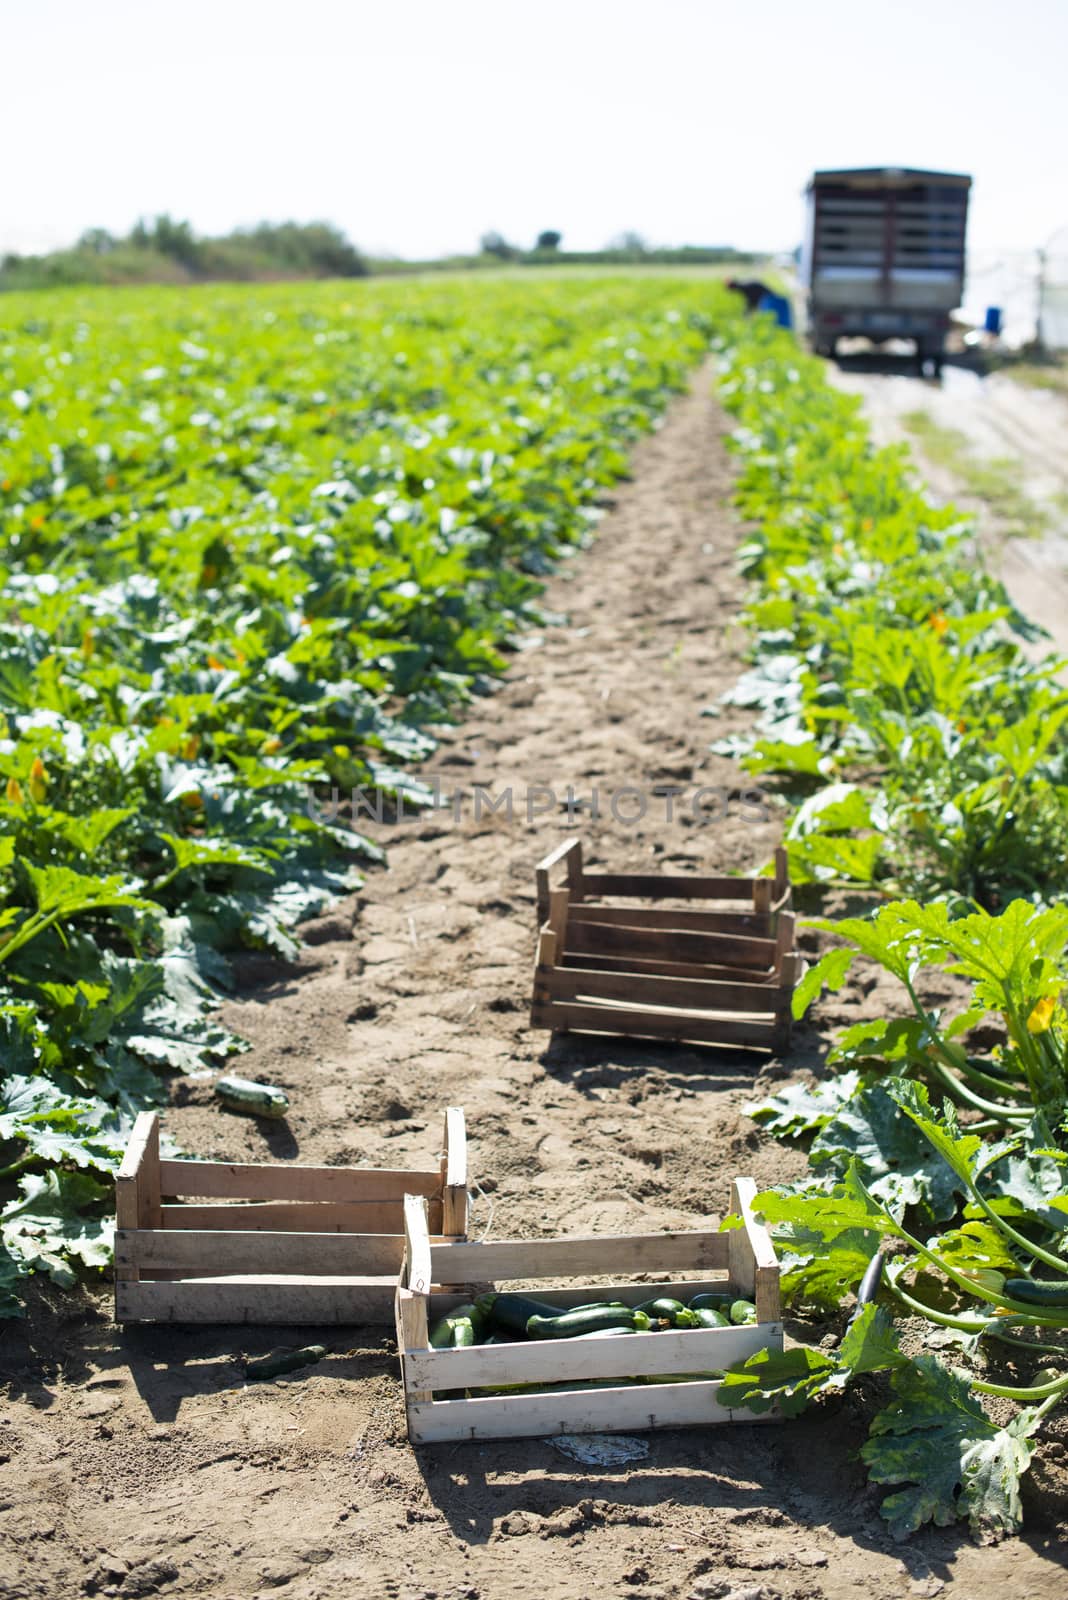 Picking zucchini in industrial farm. Wooden crates with zucchini on the field. Sunny day.